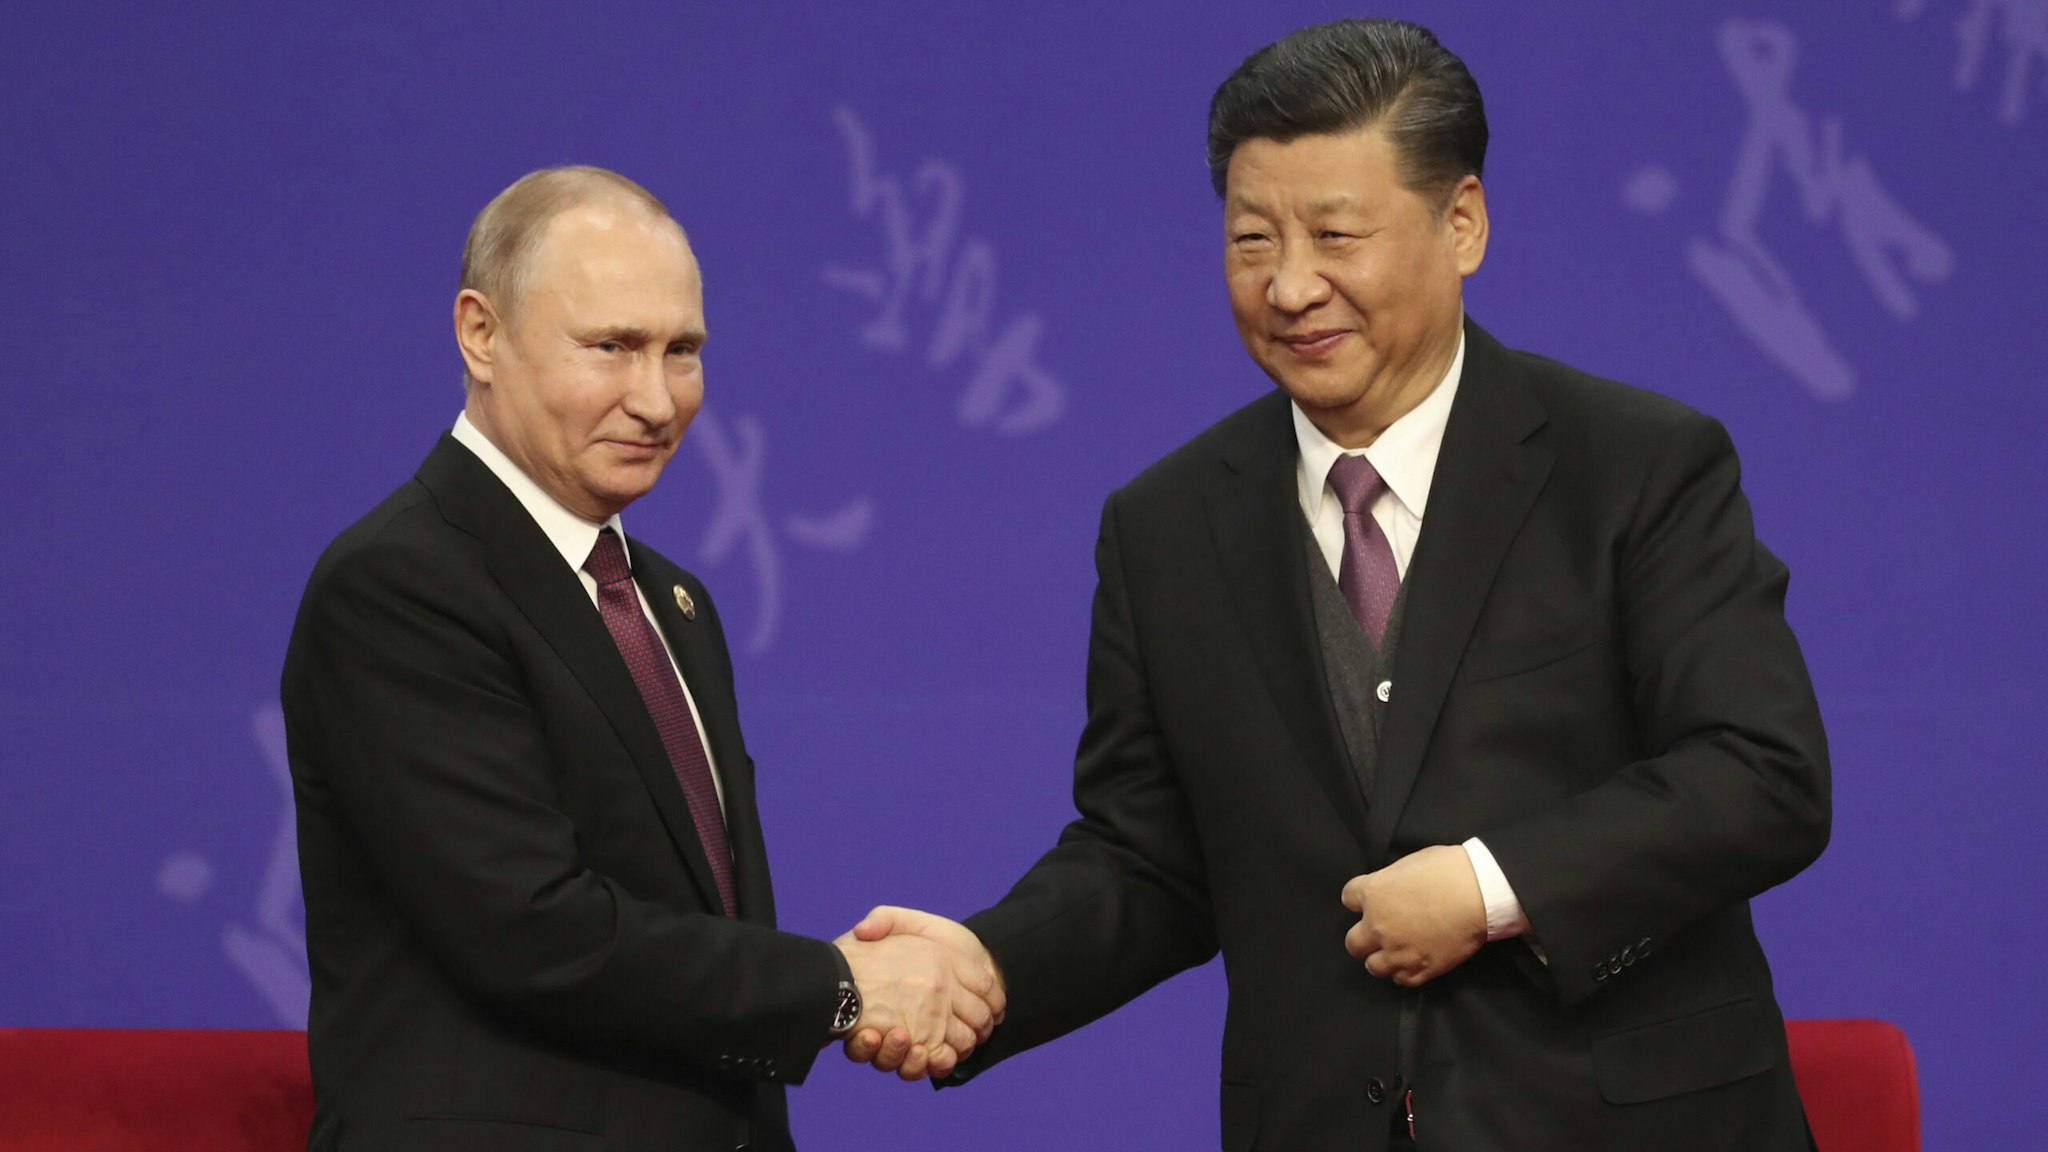 Russian President Vladimir Putin, left, shakes hands with Chinese President Xi Jinping, right, during the Tsinghua Universitys ceremony, at Friendship palace on April 26, 2019 in Beijing, China.